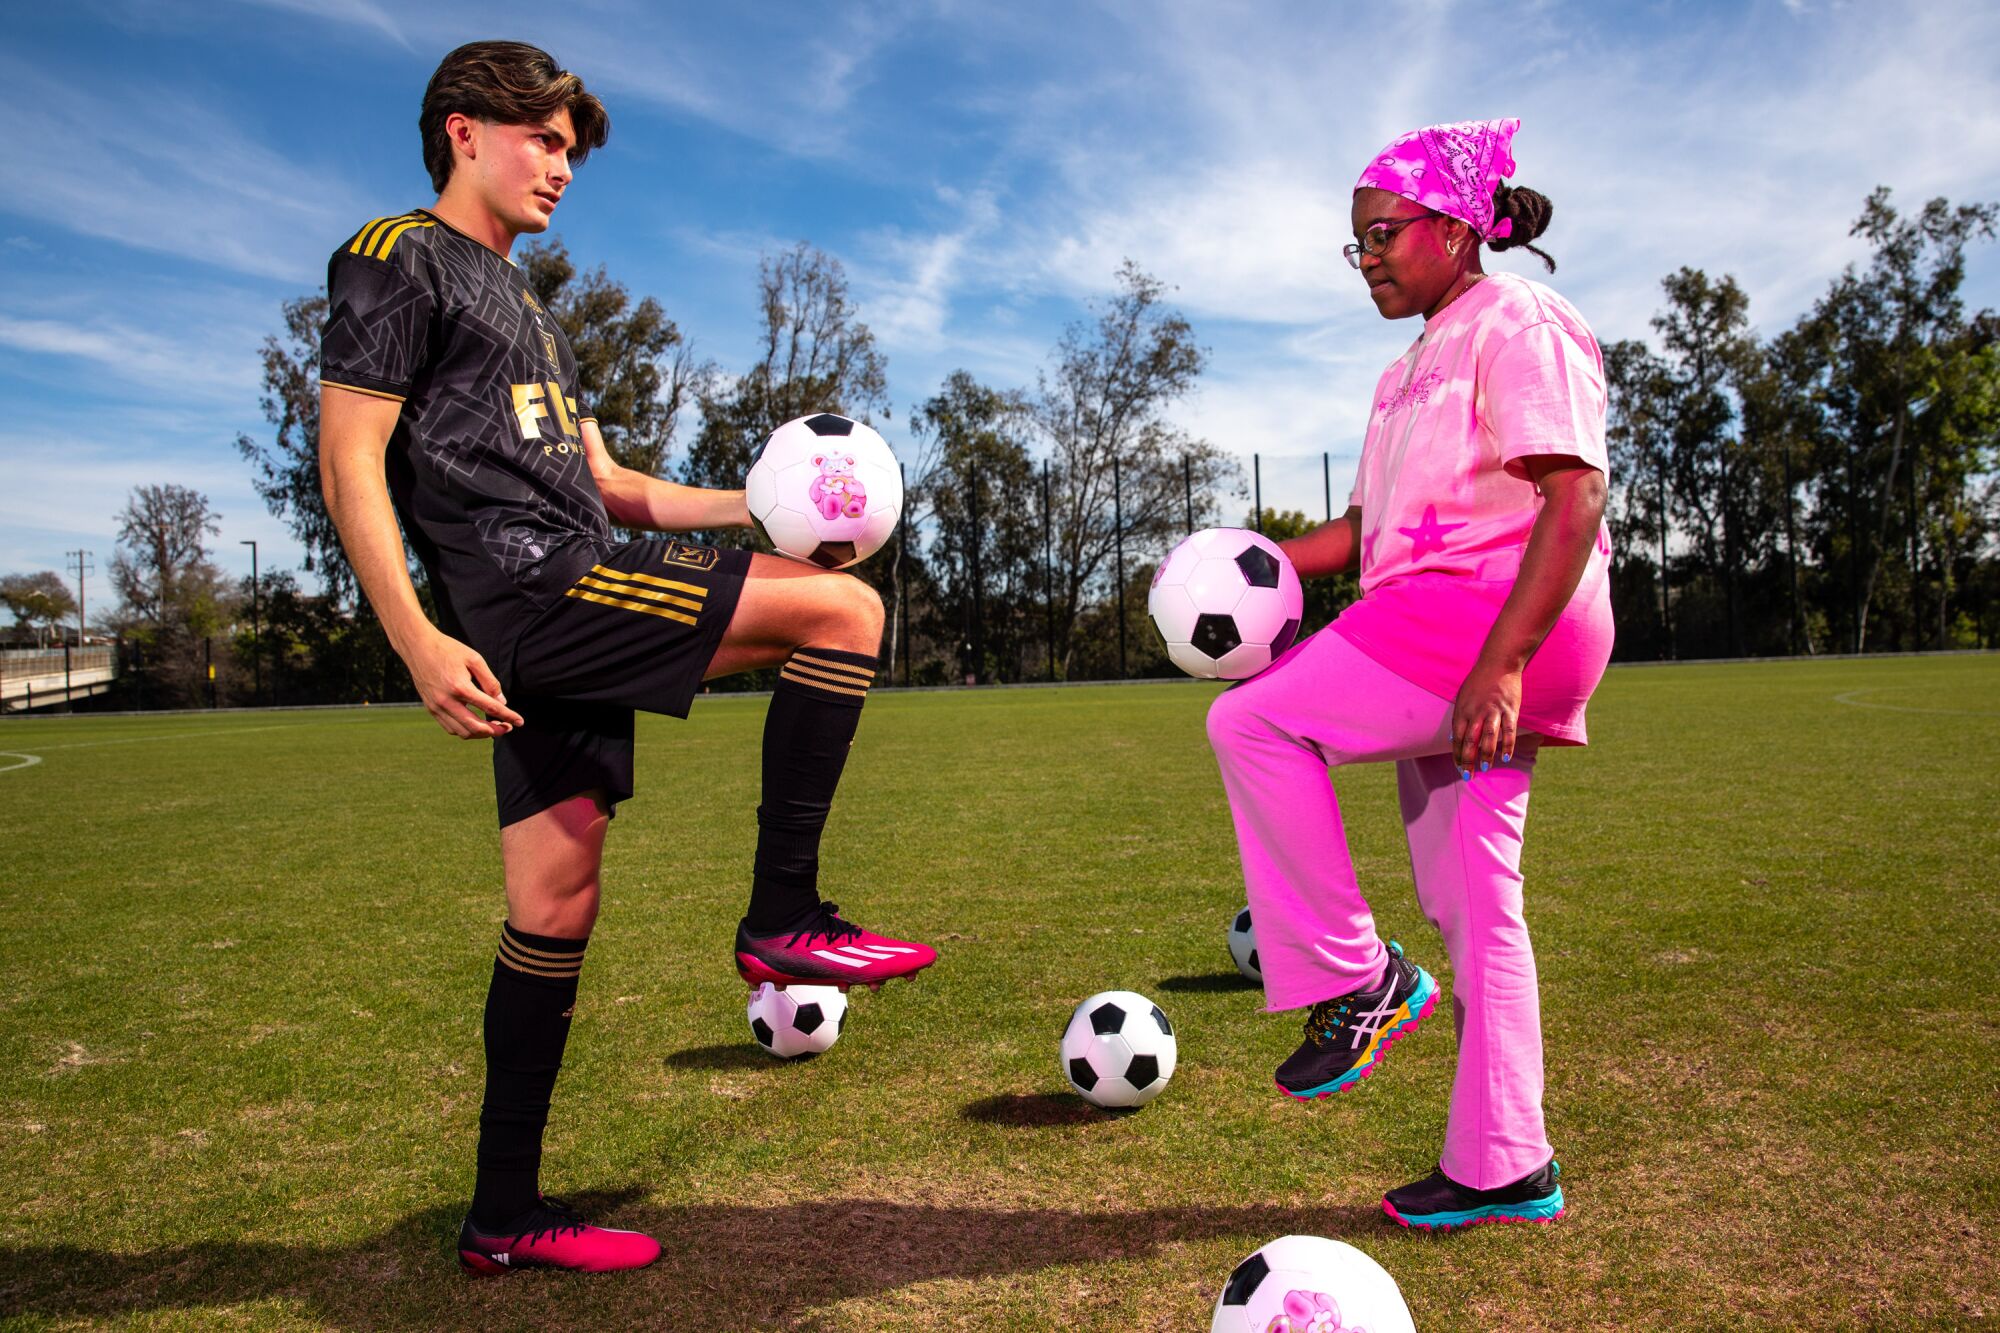 A man in a black shirt and shorts and a woman in a pink outfit with soccer balls on a field.